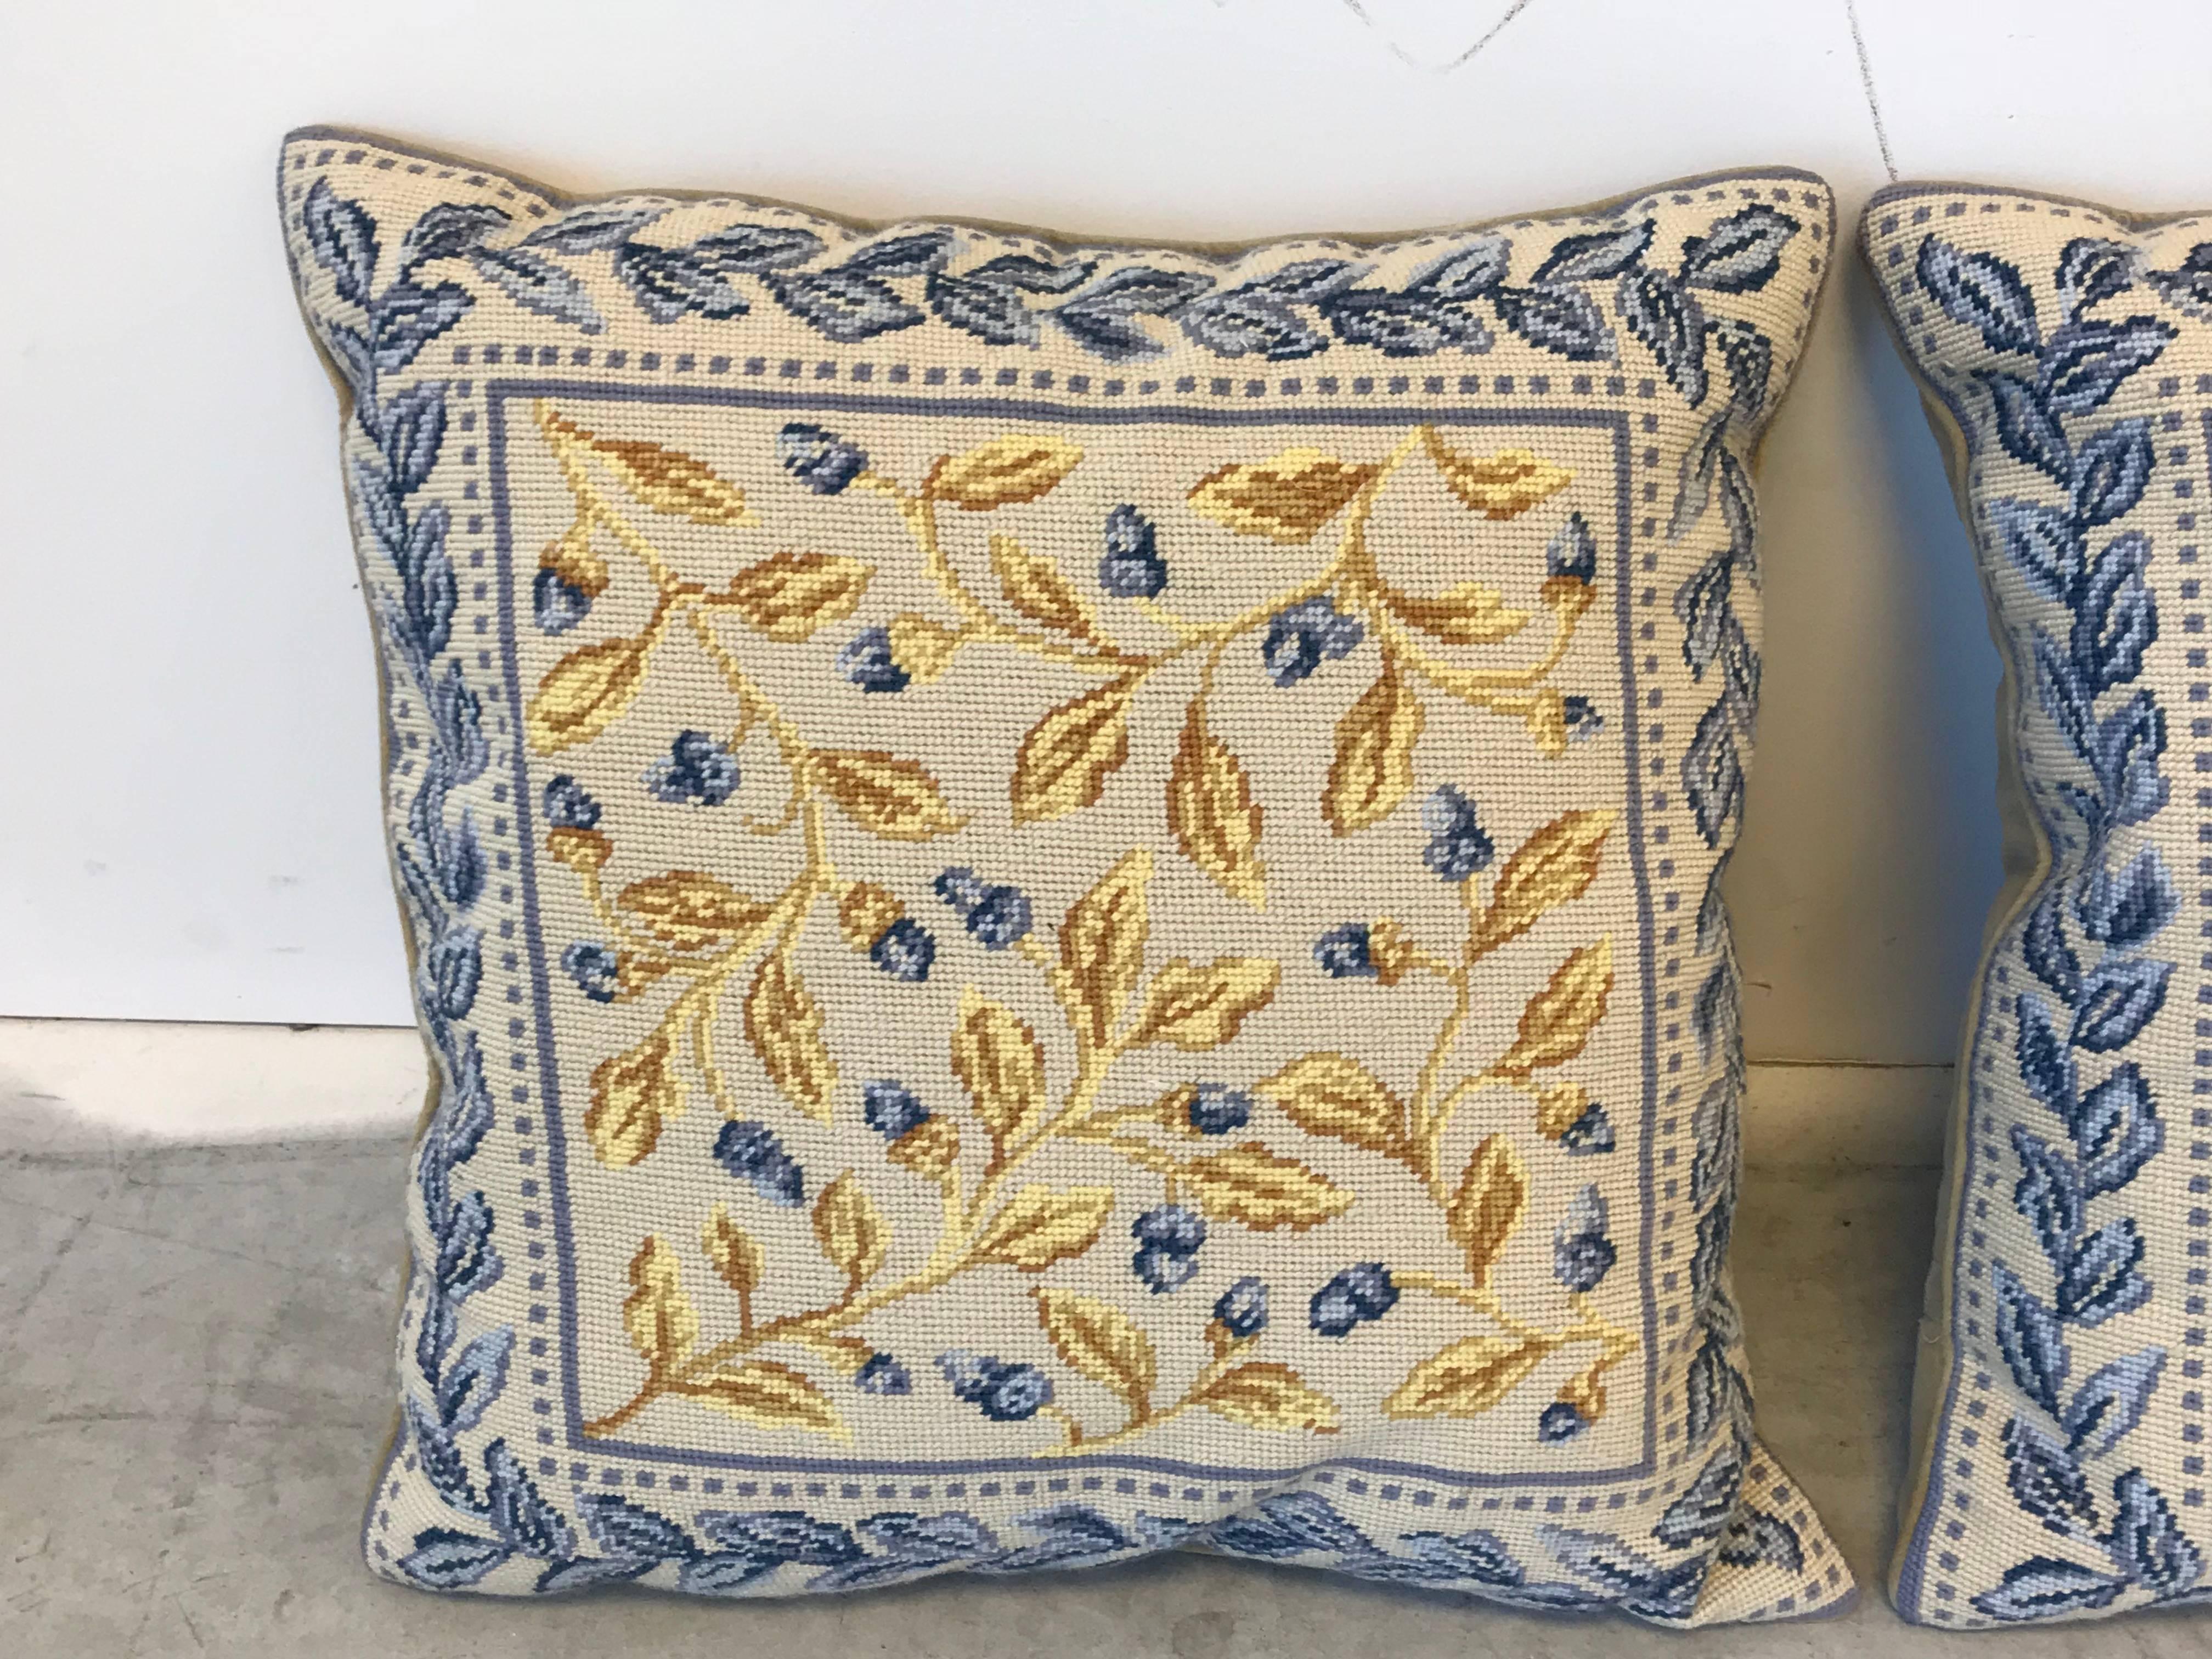 Offered is a stunning pair of 1970's needlepoint pillows. Each pillow has a blue and yellow floral motif, with a beige background. Velvet backside, with zipper. Down fill insert included. 